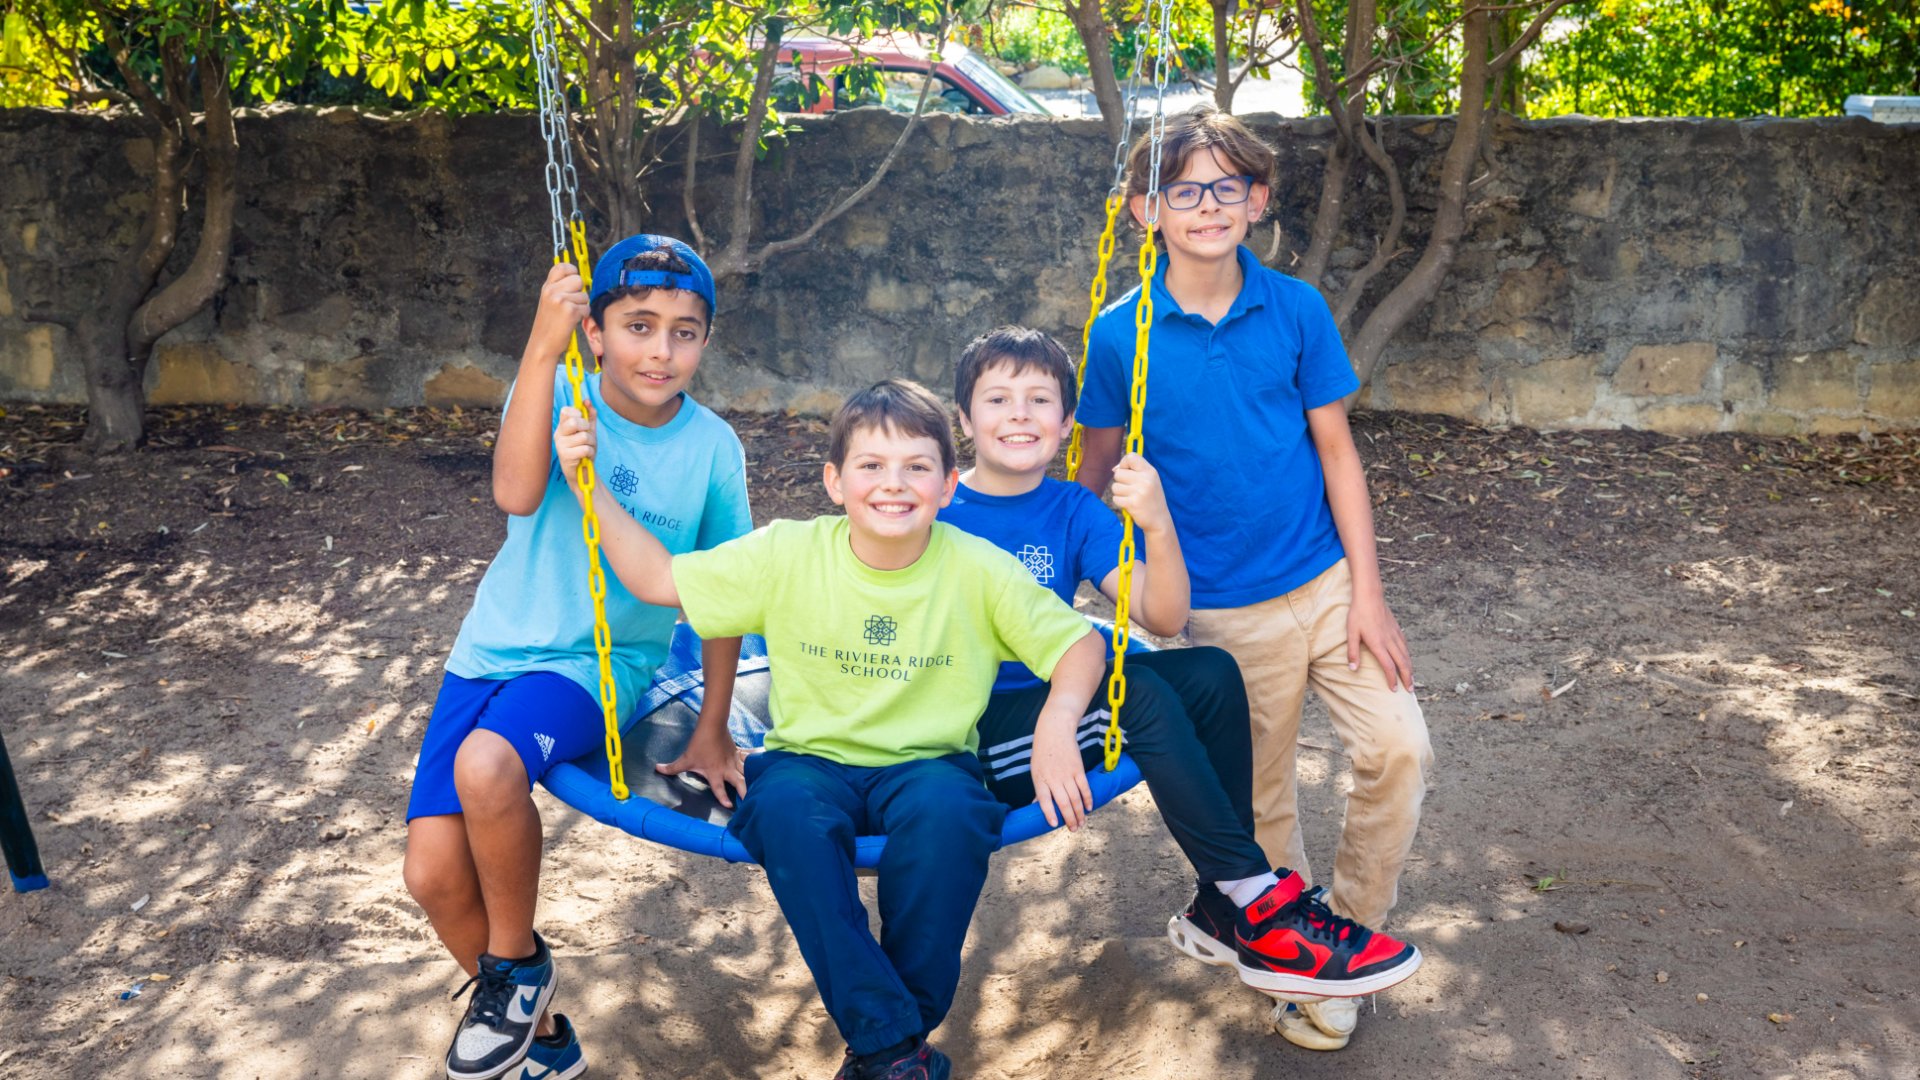 Students on a swing in the Riviera Ridge School outdoor facilities.